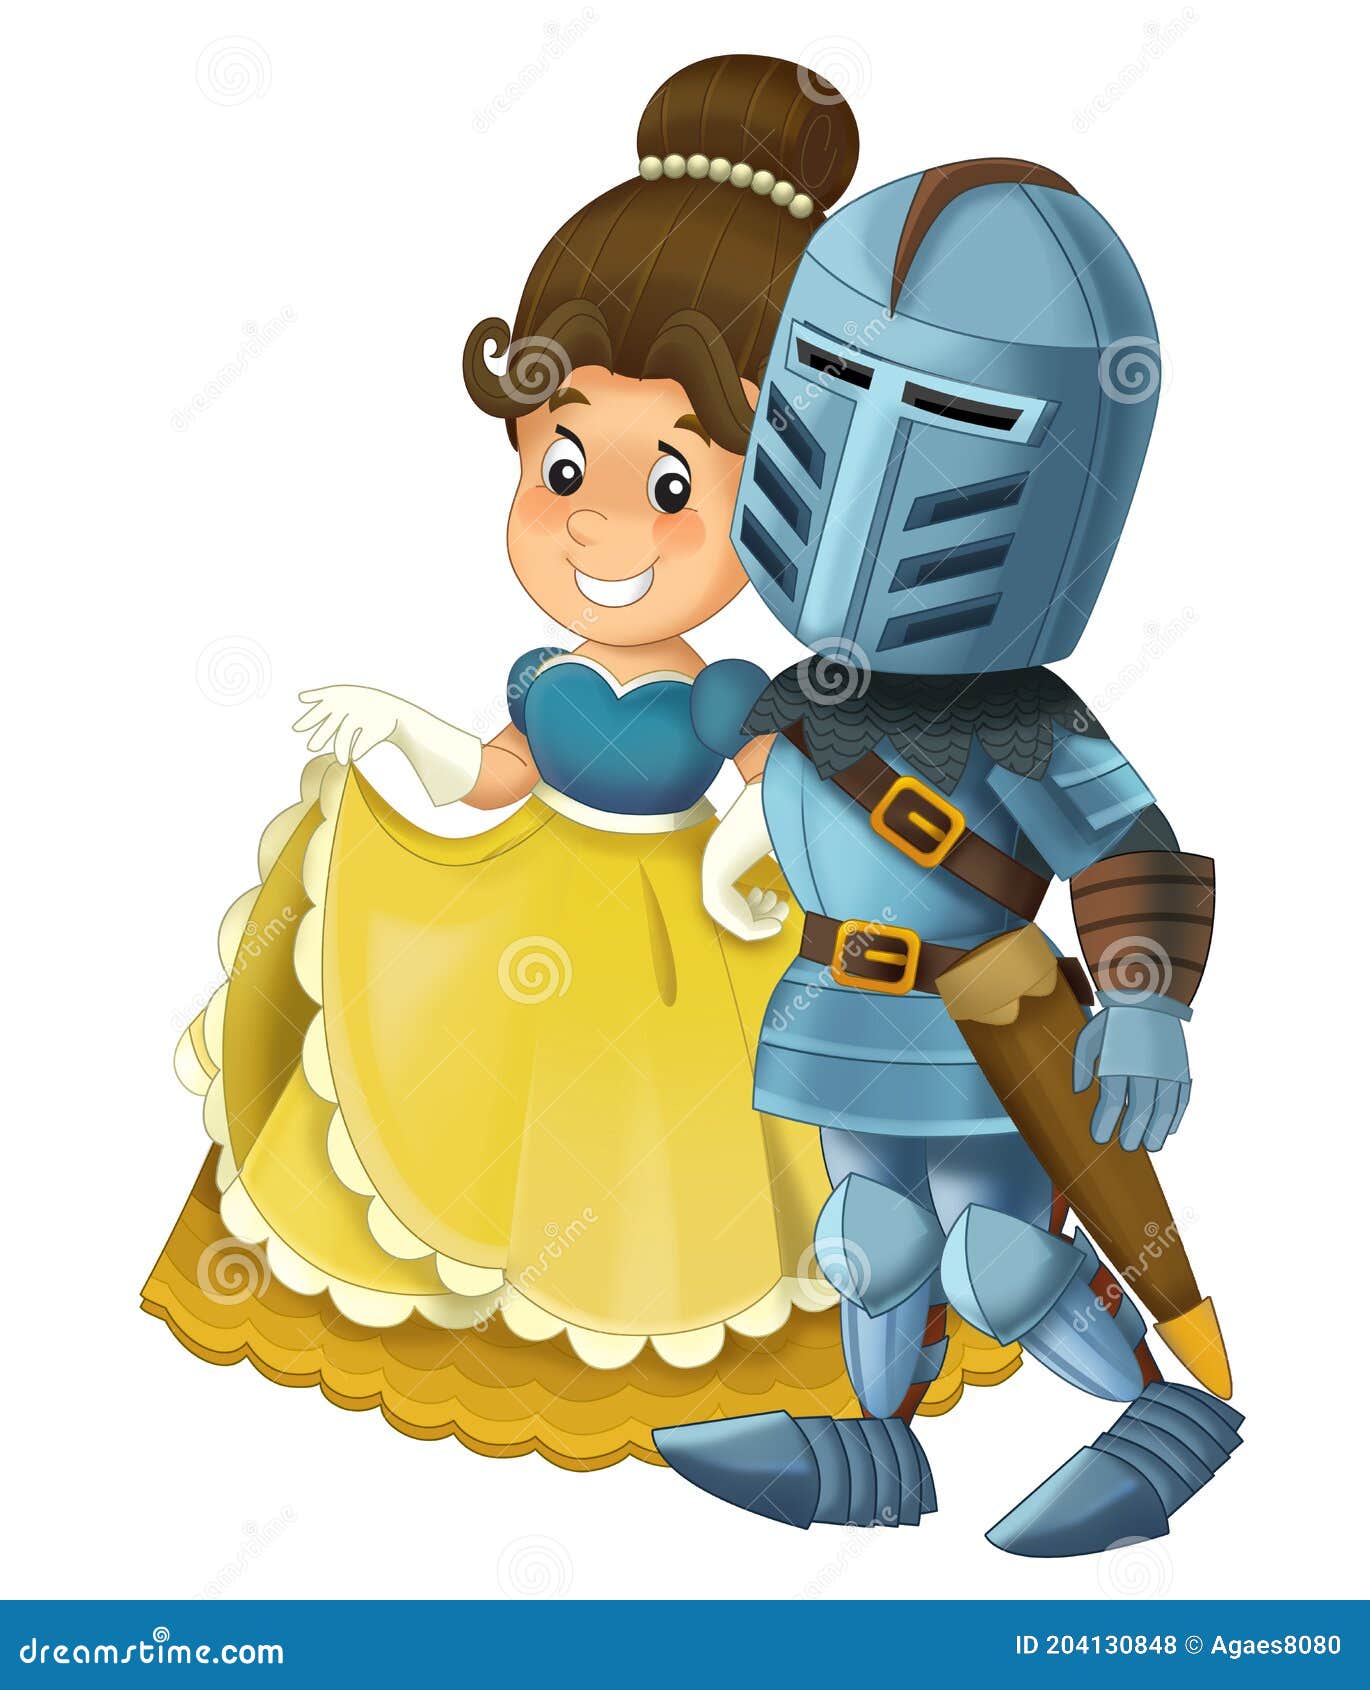 Cartoon Scene with Knight Prince and Princess Together on White Background  - Illustration Stock Illustration - Illustration of love, king: 204130848